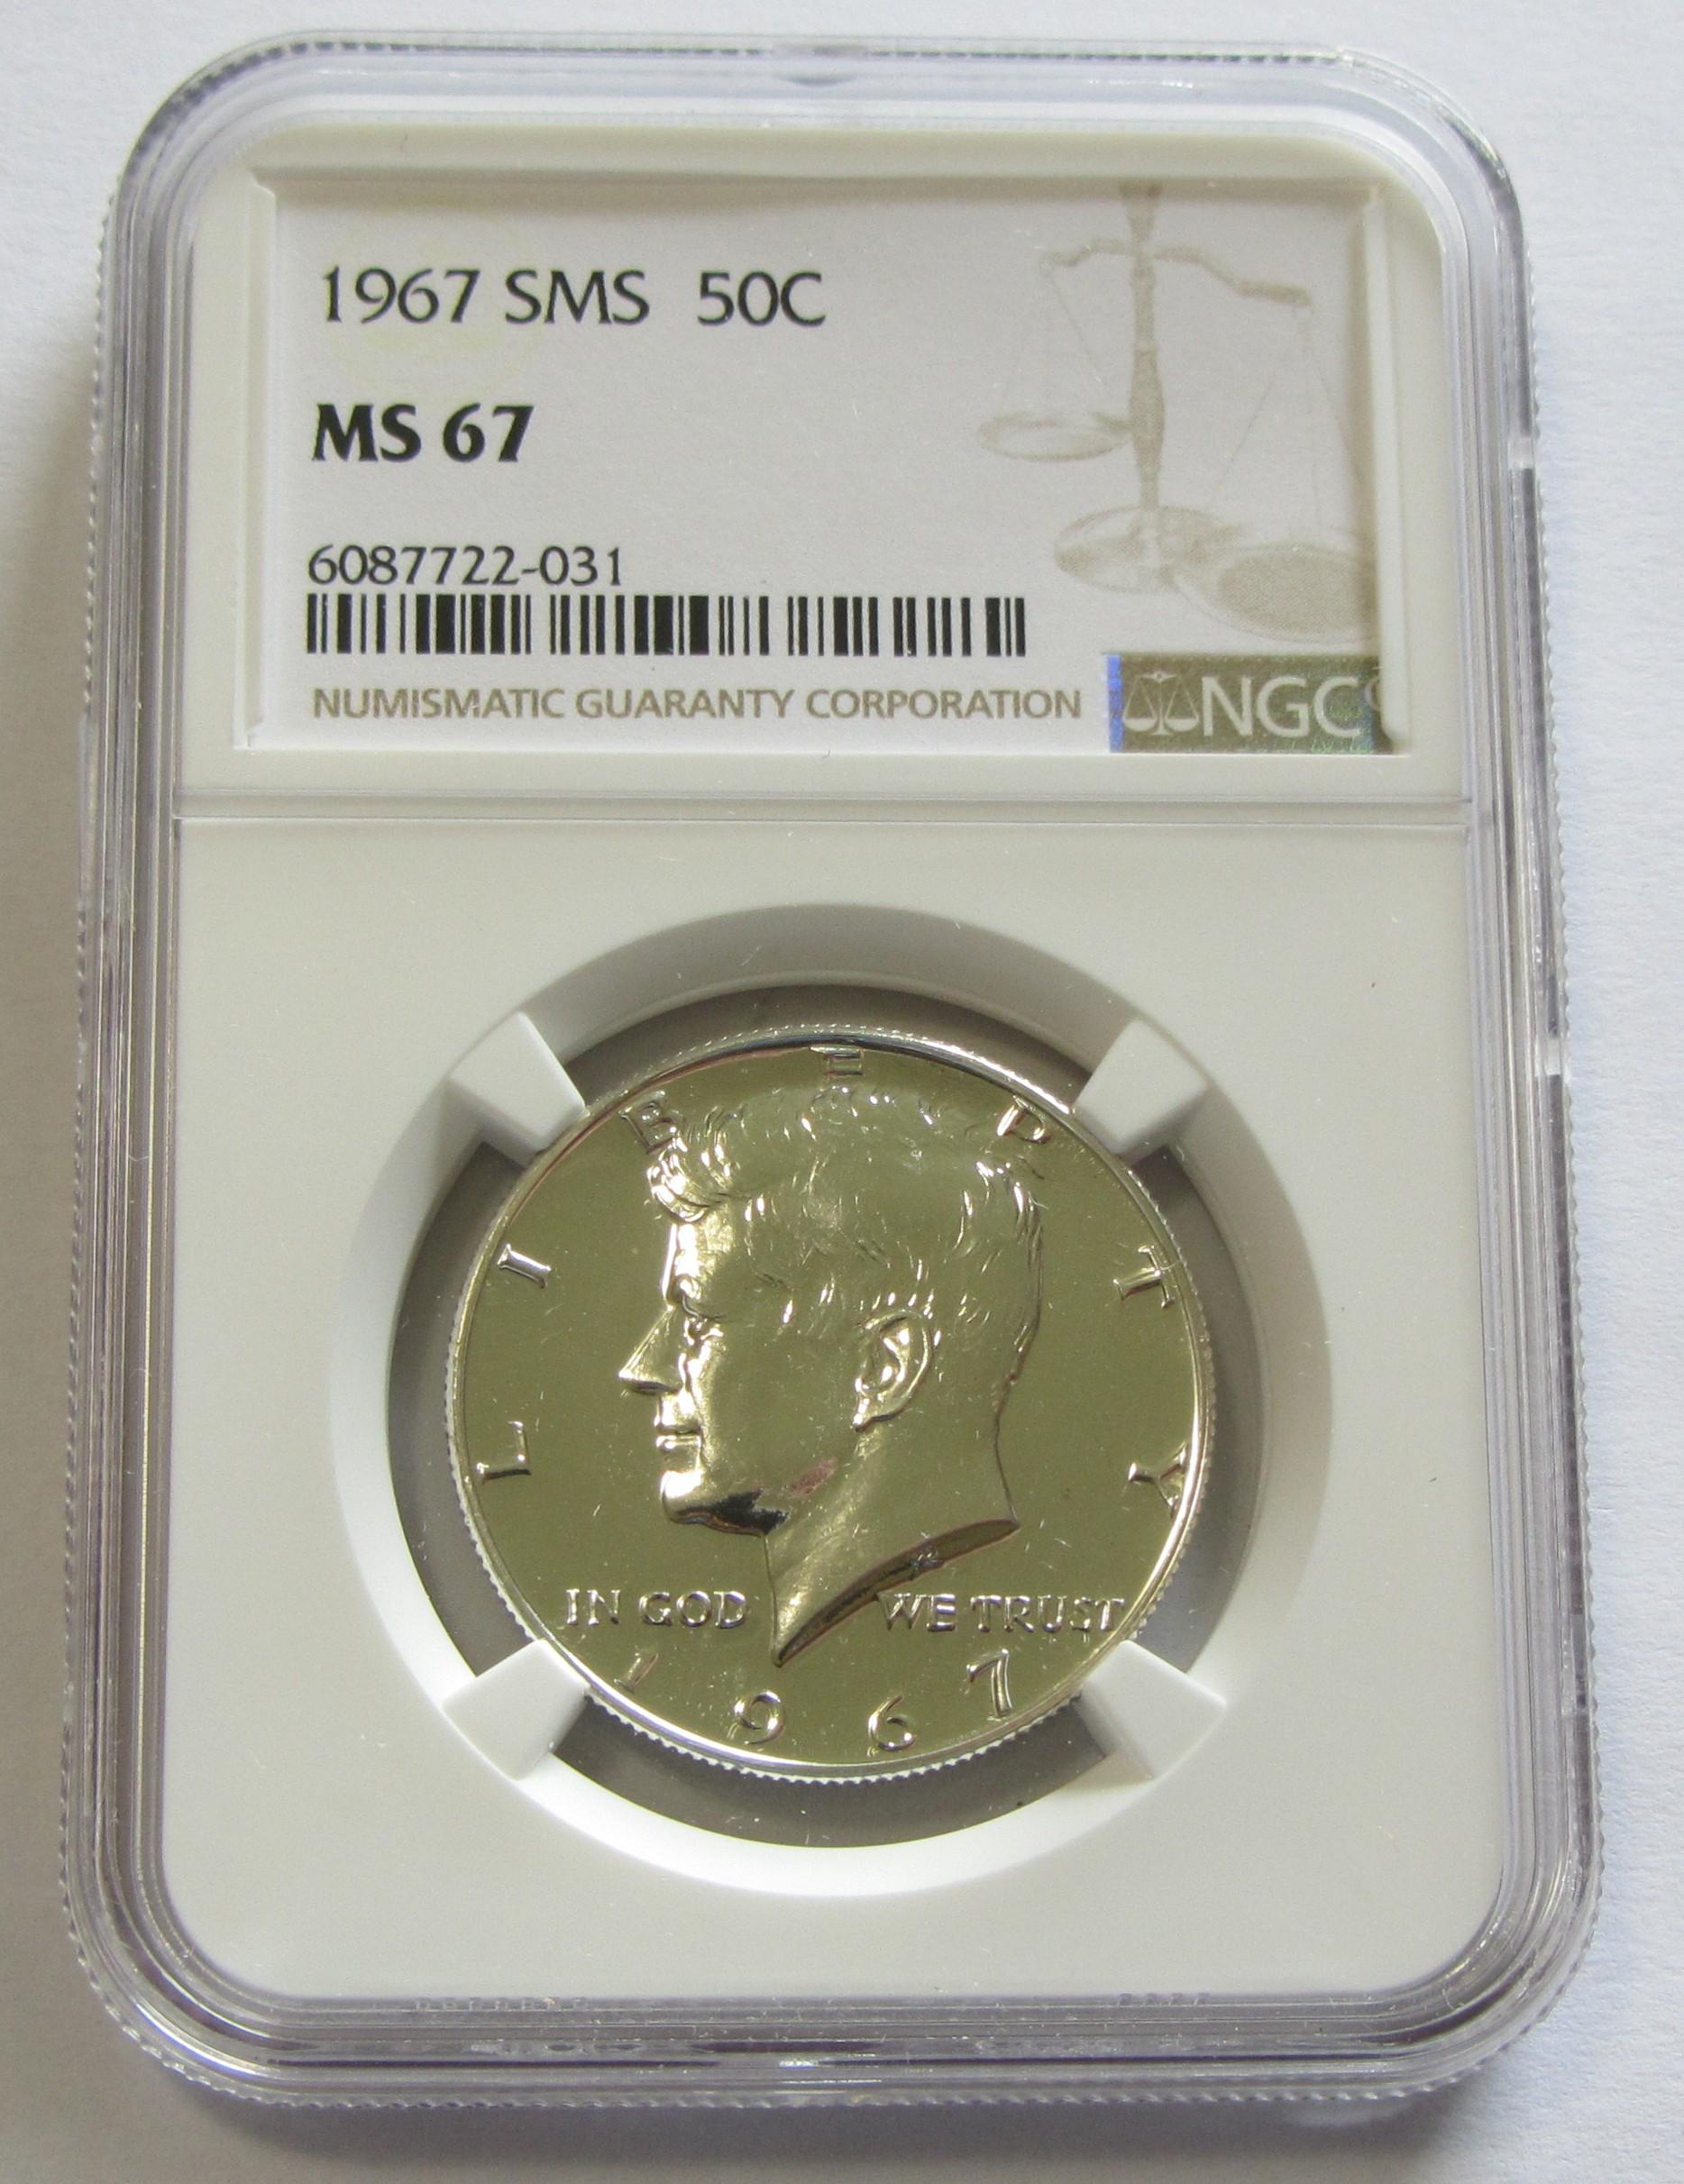 1967 LKENNEDY SMS NGC 67